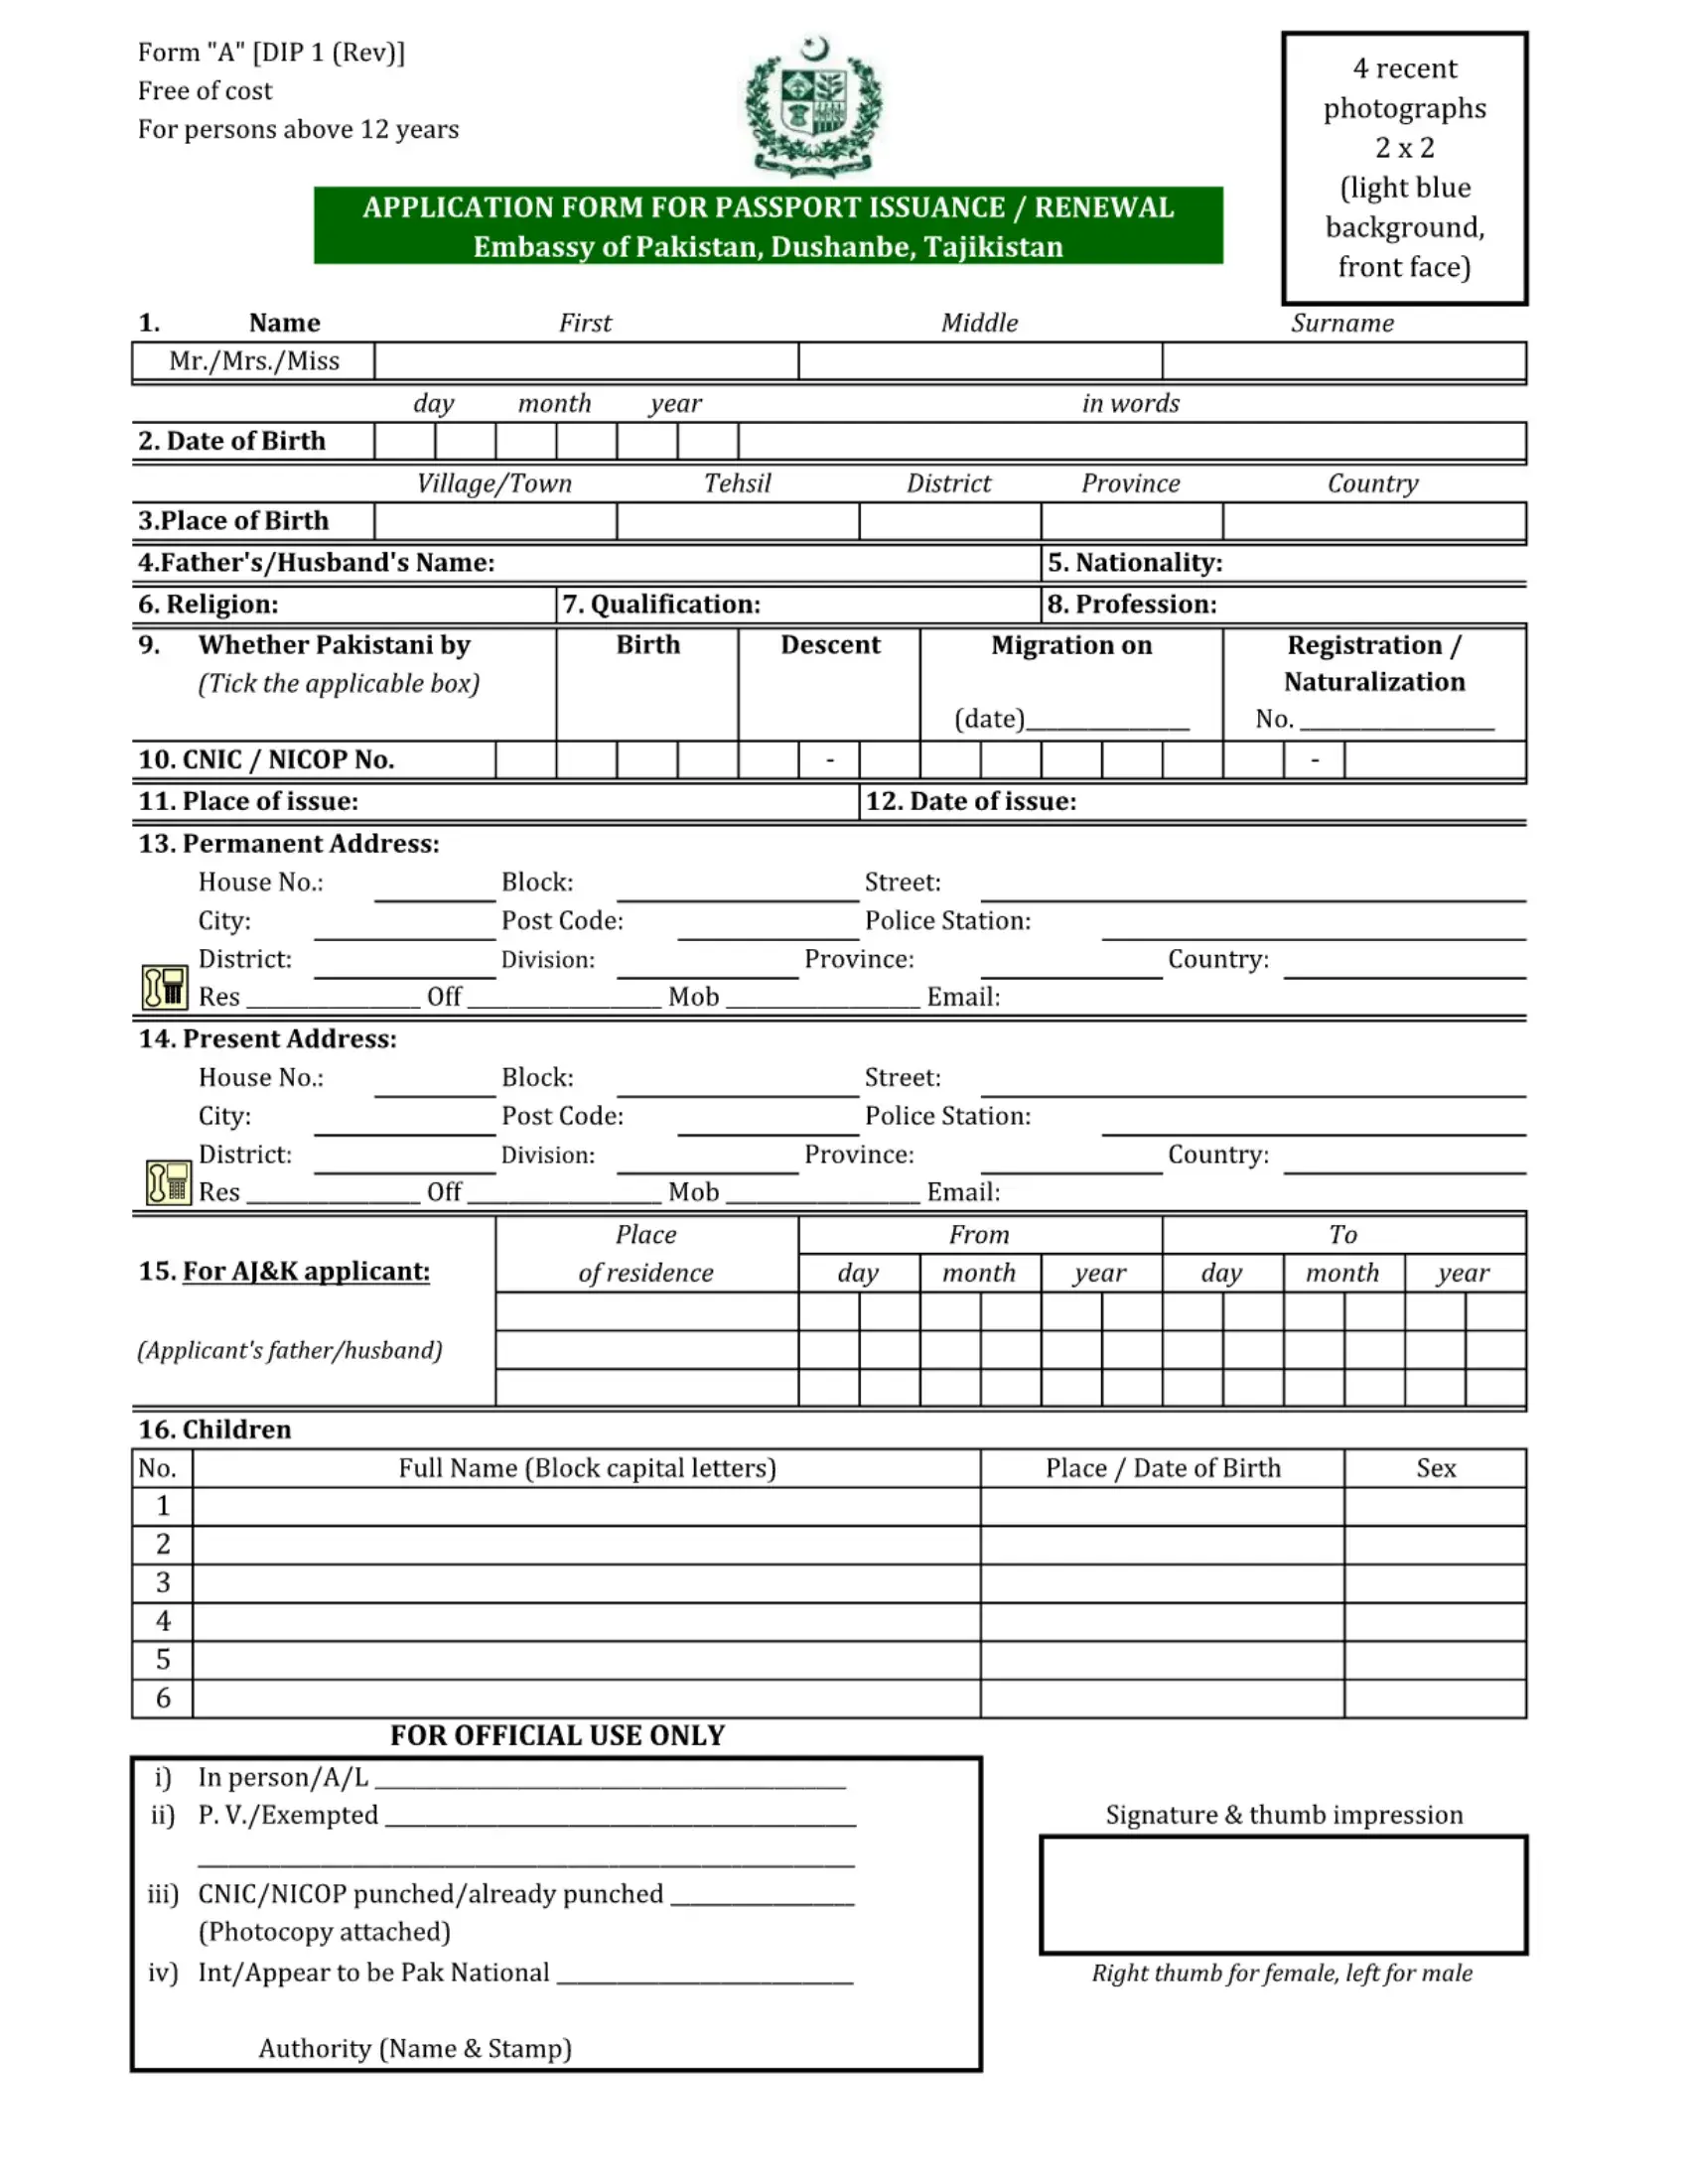 passport-pdf-forms-fillable-and-printable